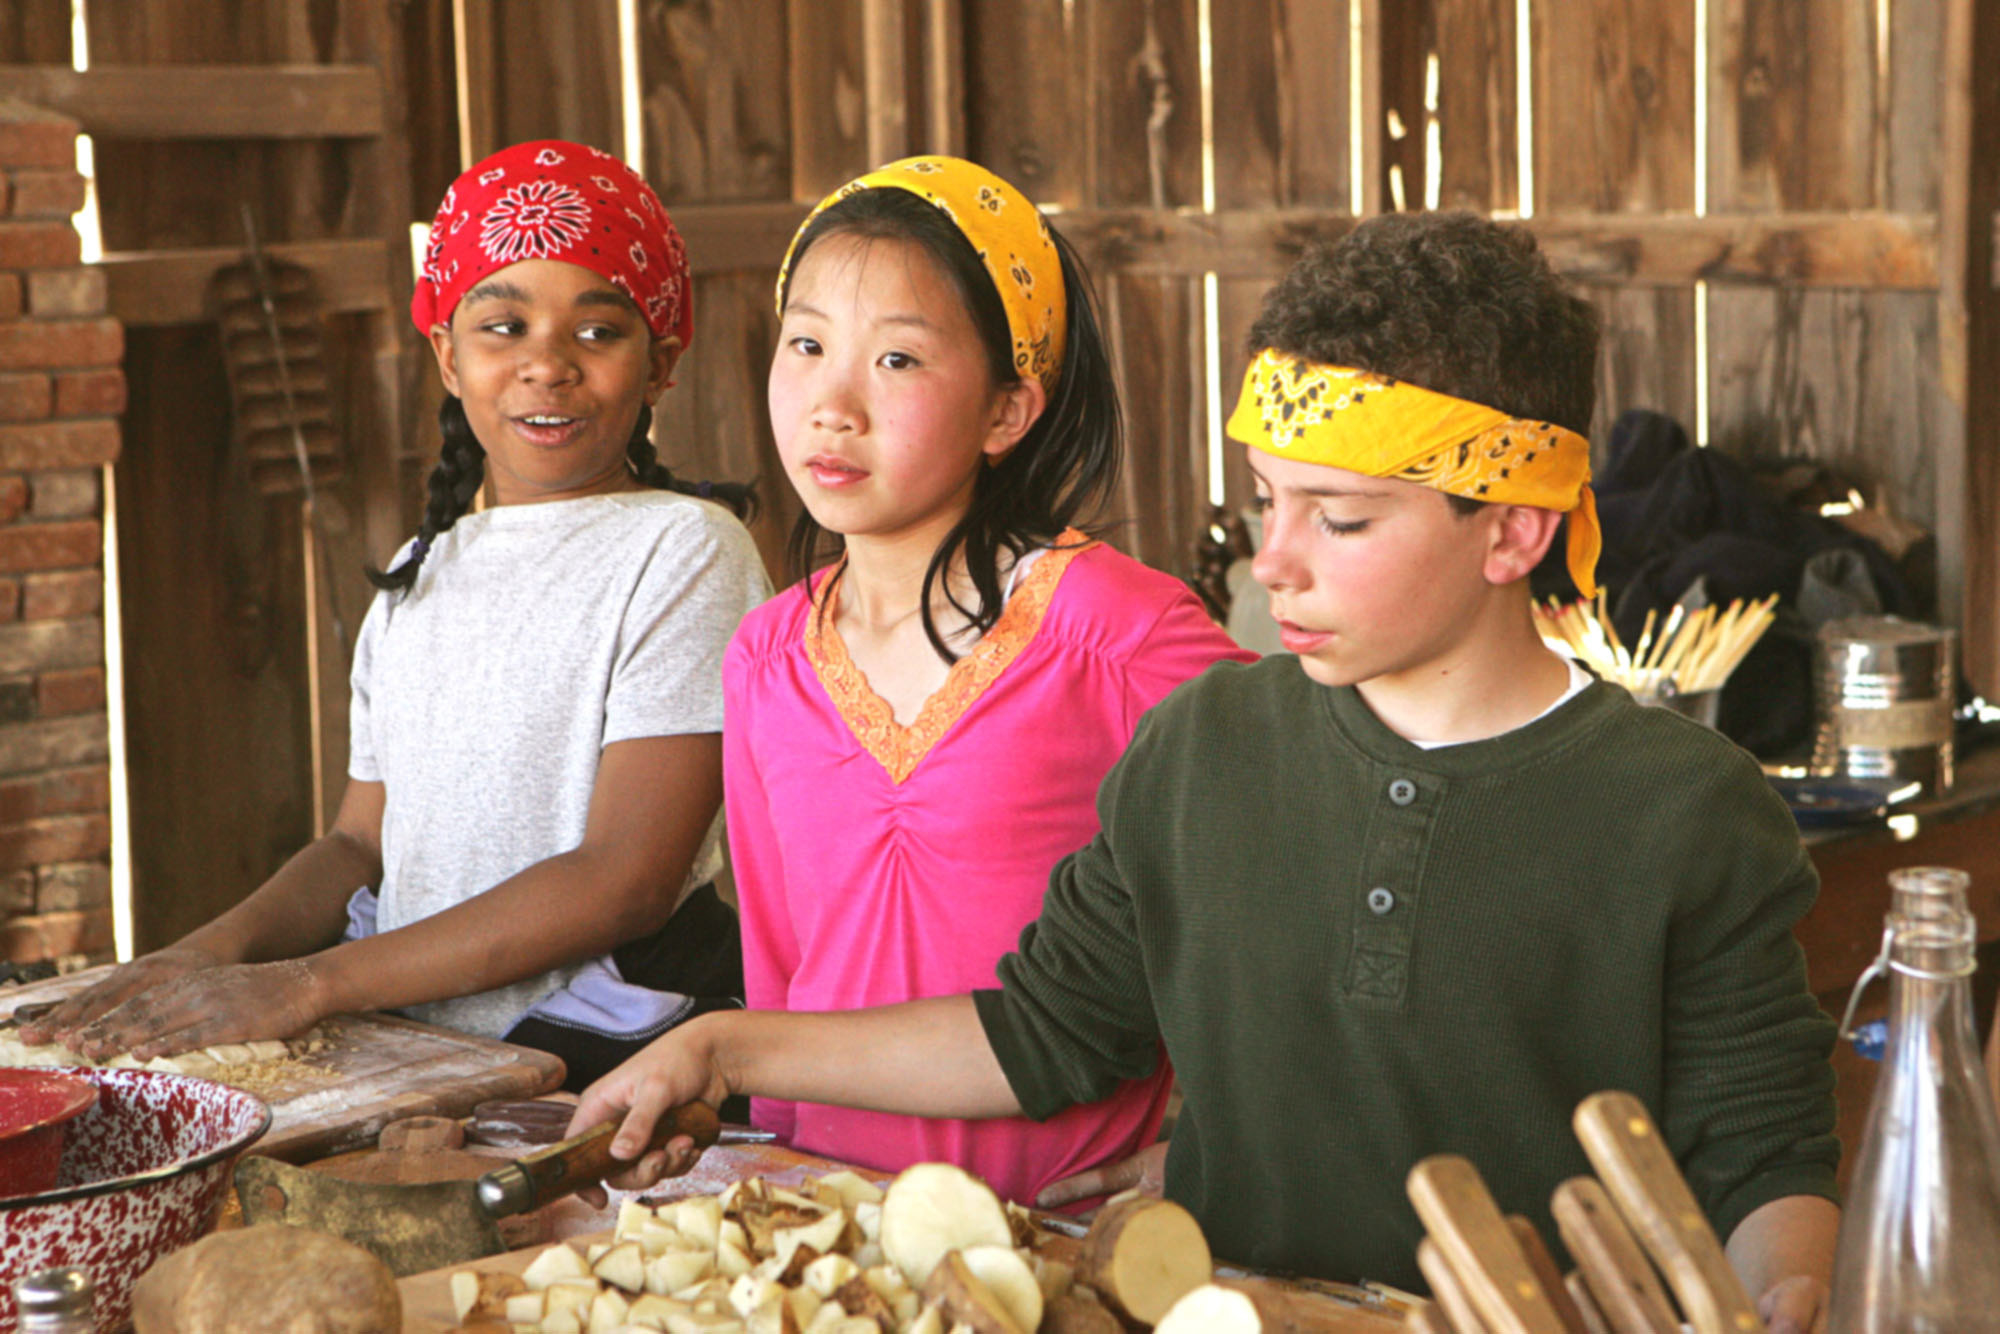 a group of kids in bandanas who look kind of over it cooking a meal in a dilapidated barn